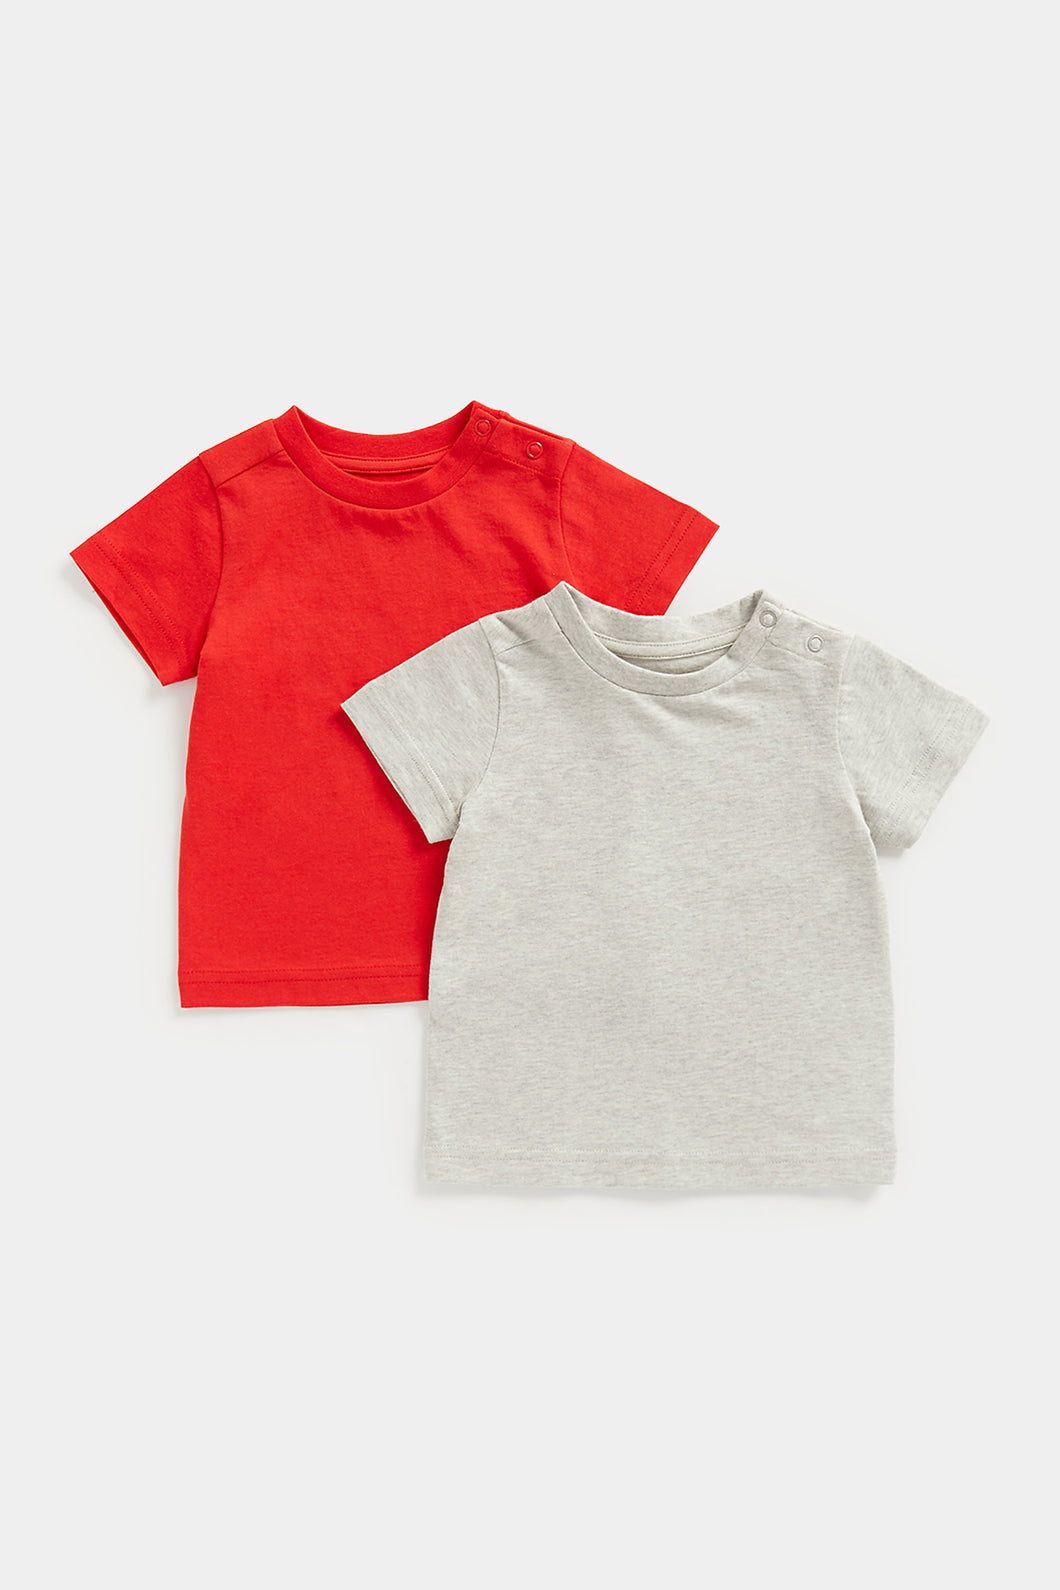 Mothercare Grey And Red T-Shirts - 2 Pack